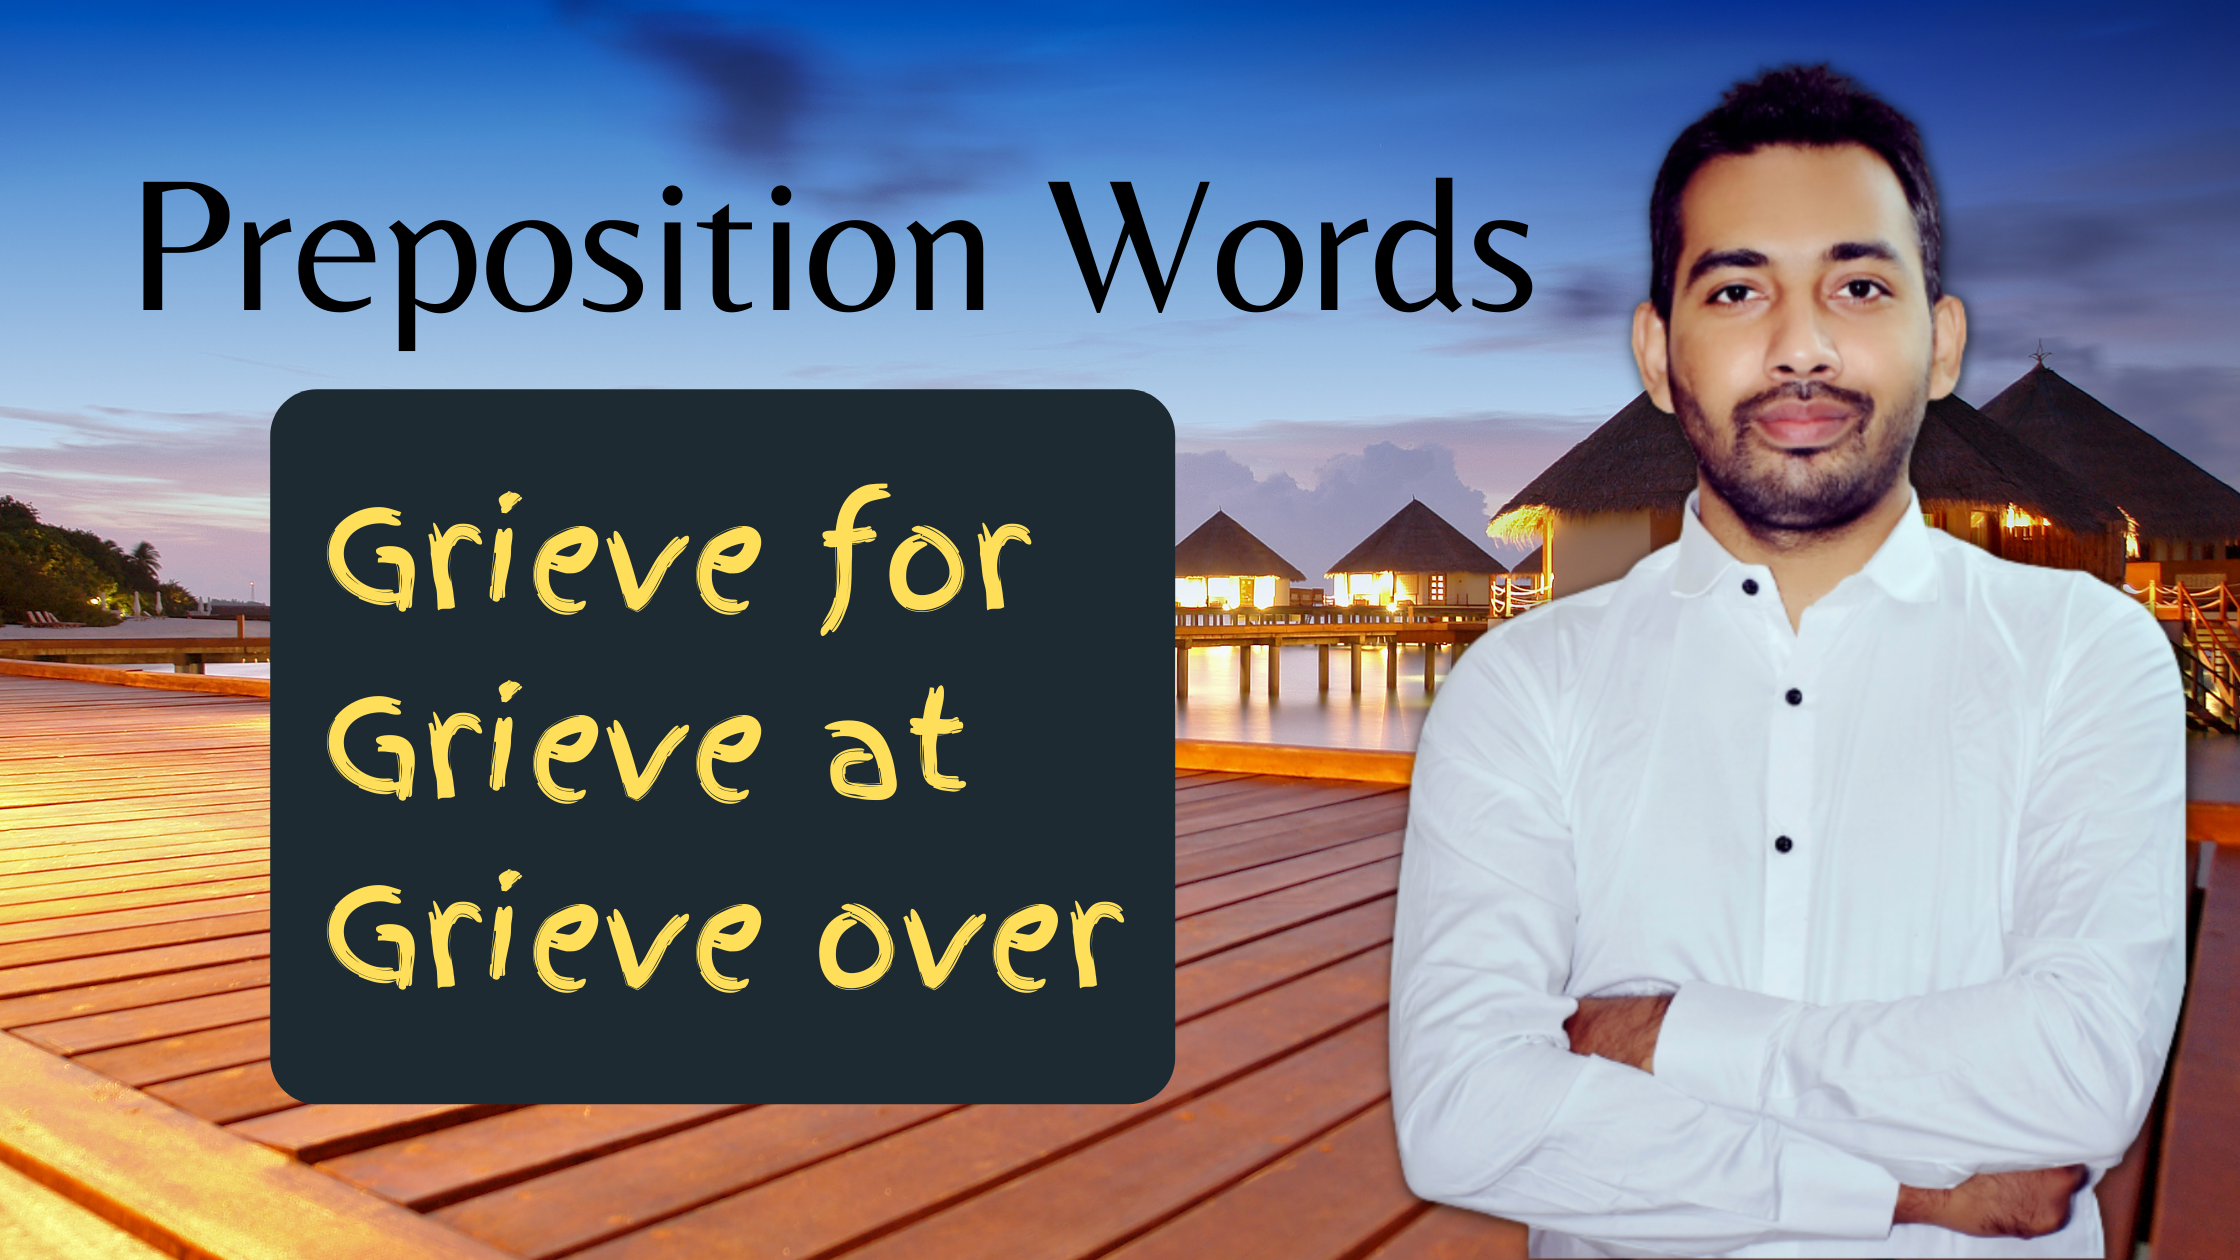 Preposition words with grieve